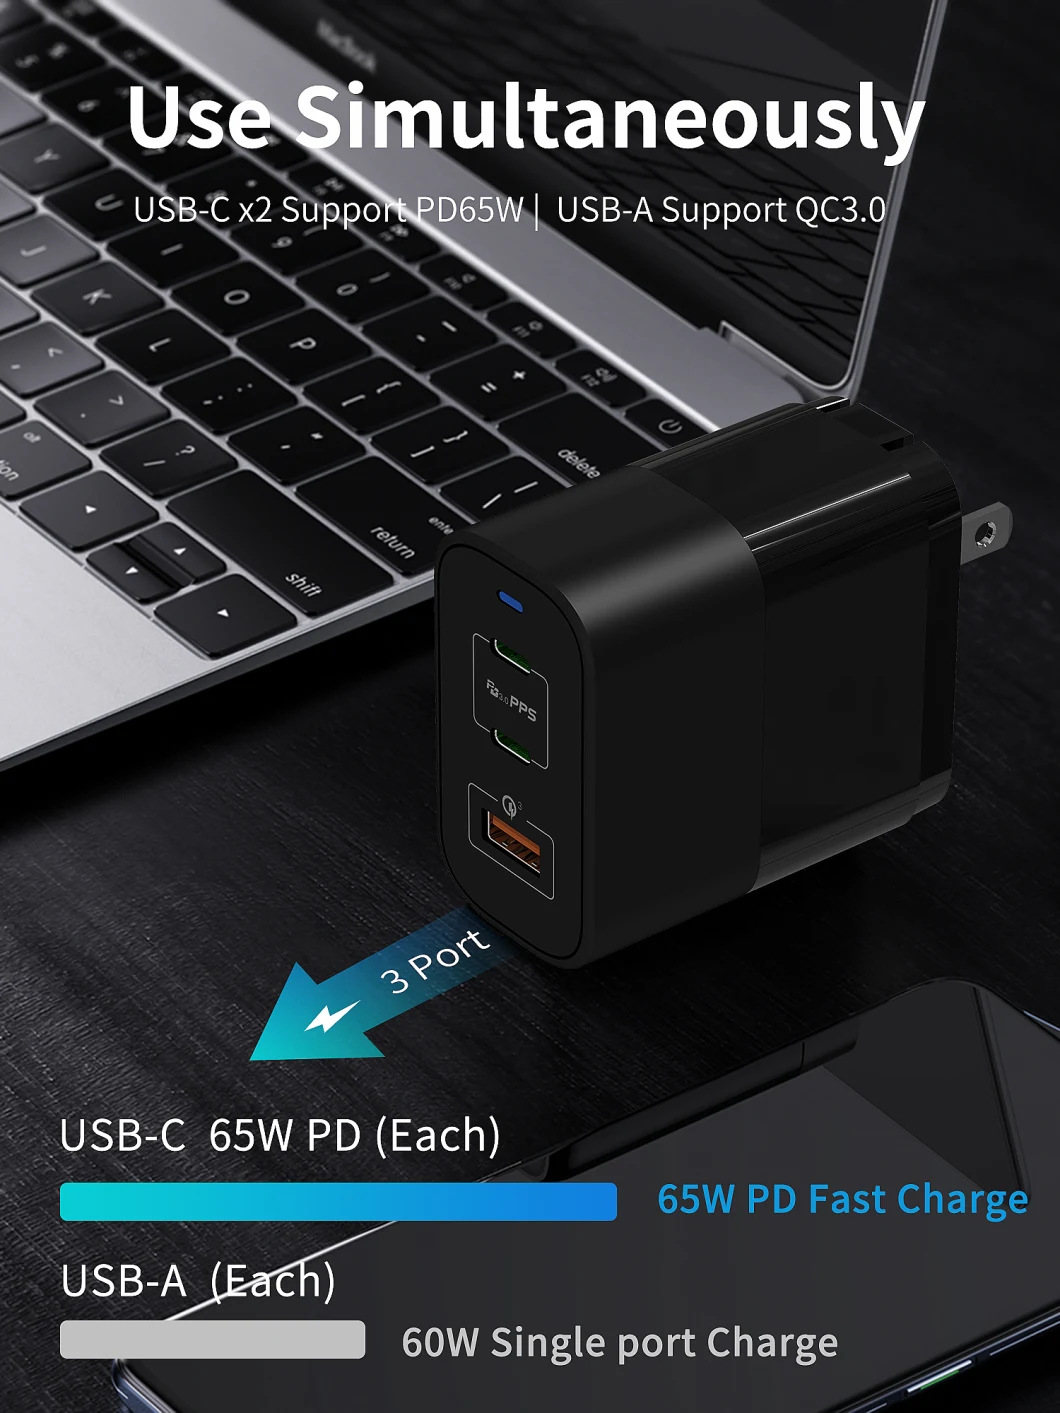 GaN 65W USB Type C Wall Fast Charger Adapter for iPad PRO 11